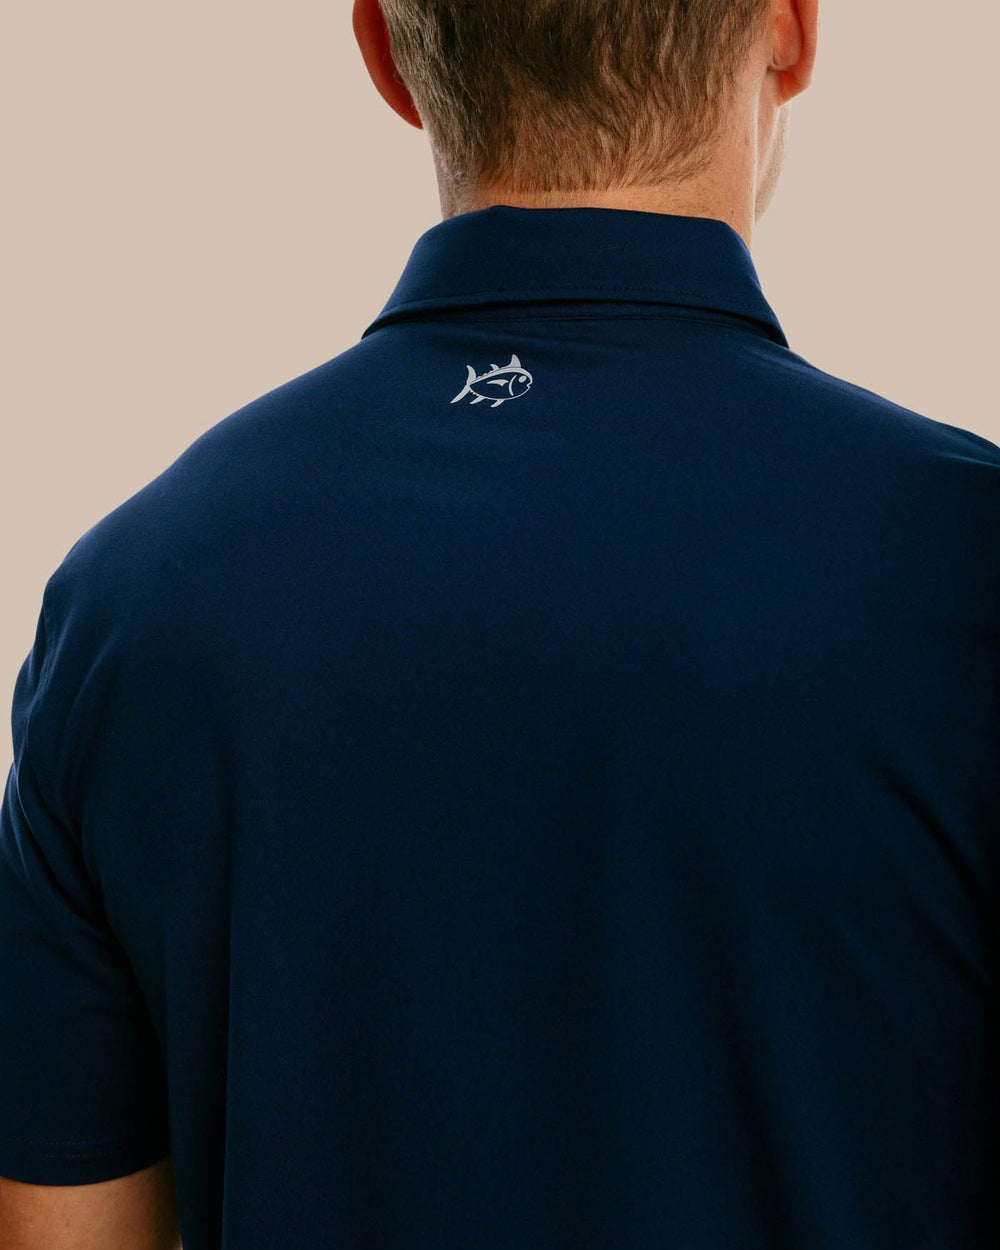 The yoke of the Men's Ryder Performance Polo Shirt by Southern Tide - True Navy